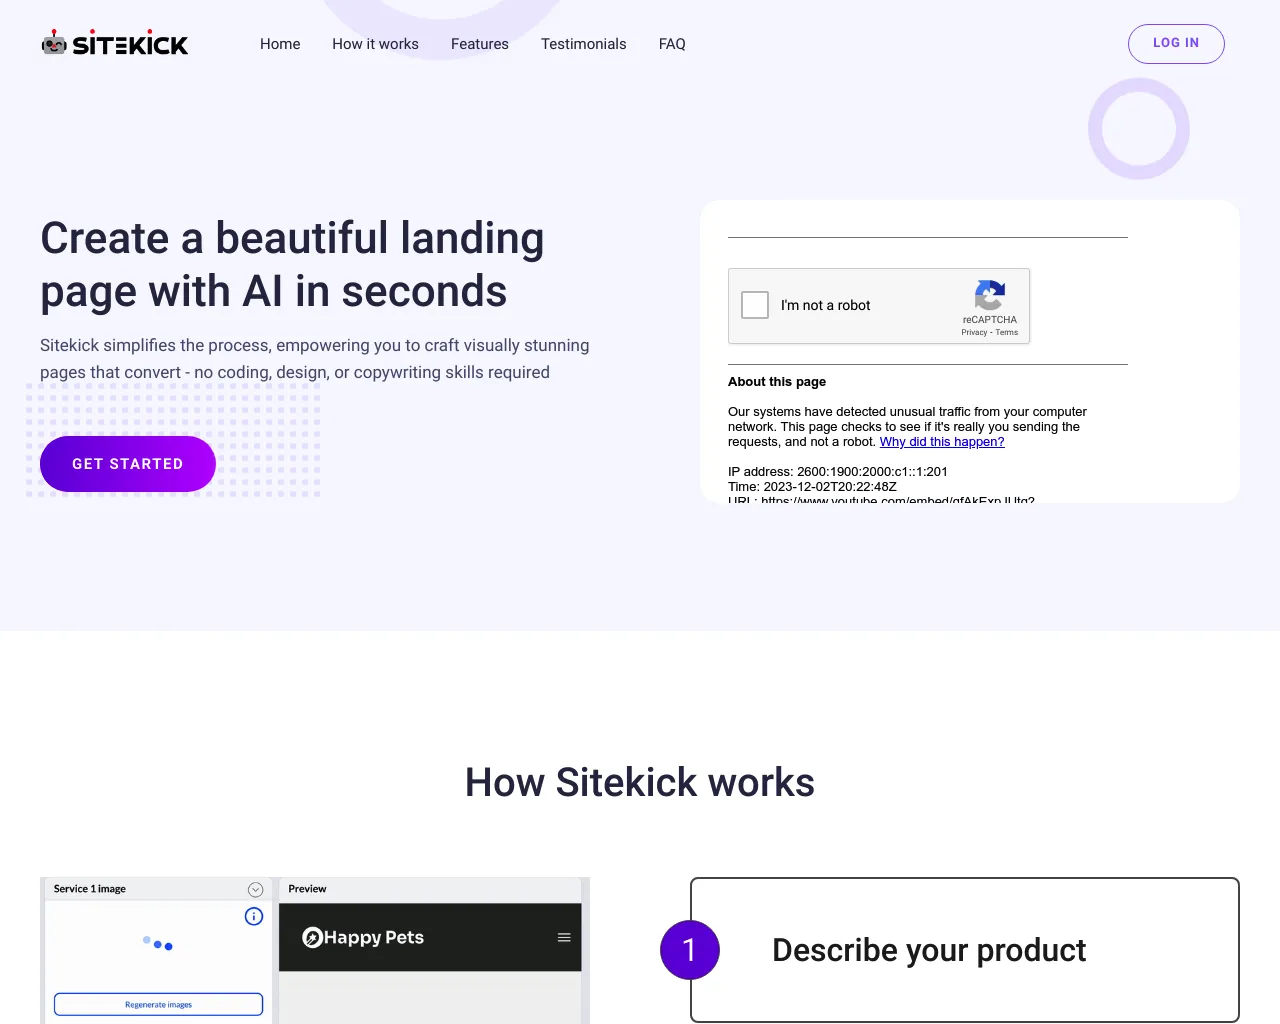 Sitekick - Create a beautiful landing page with AI in seconds.